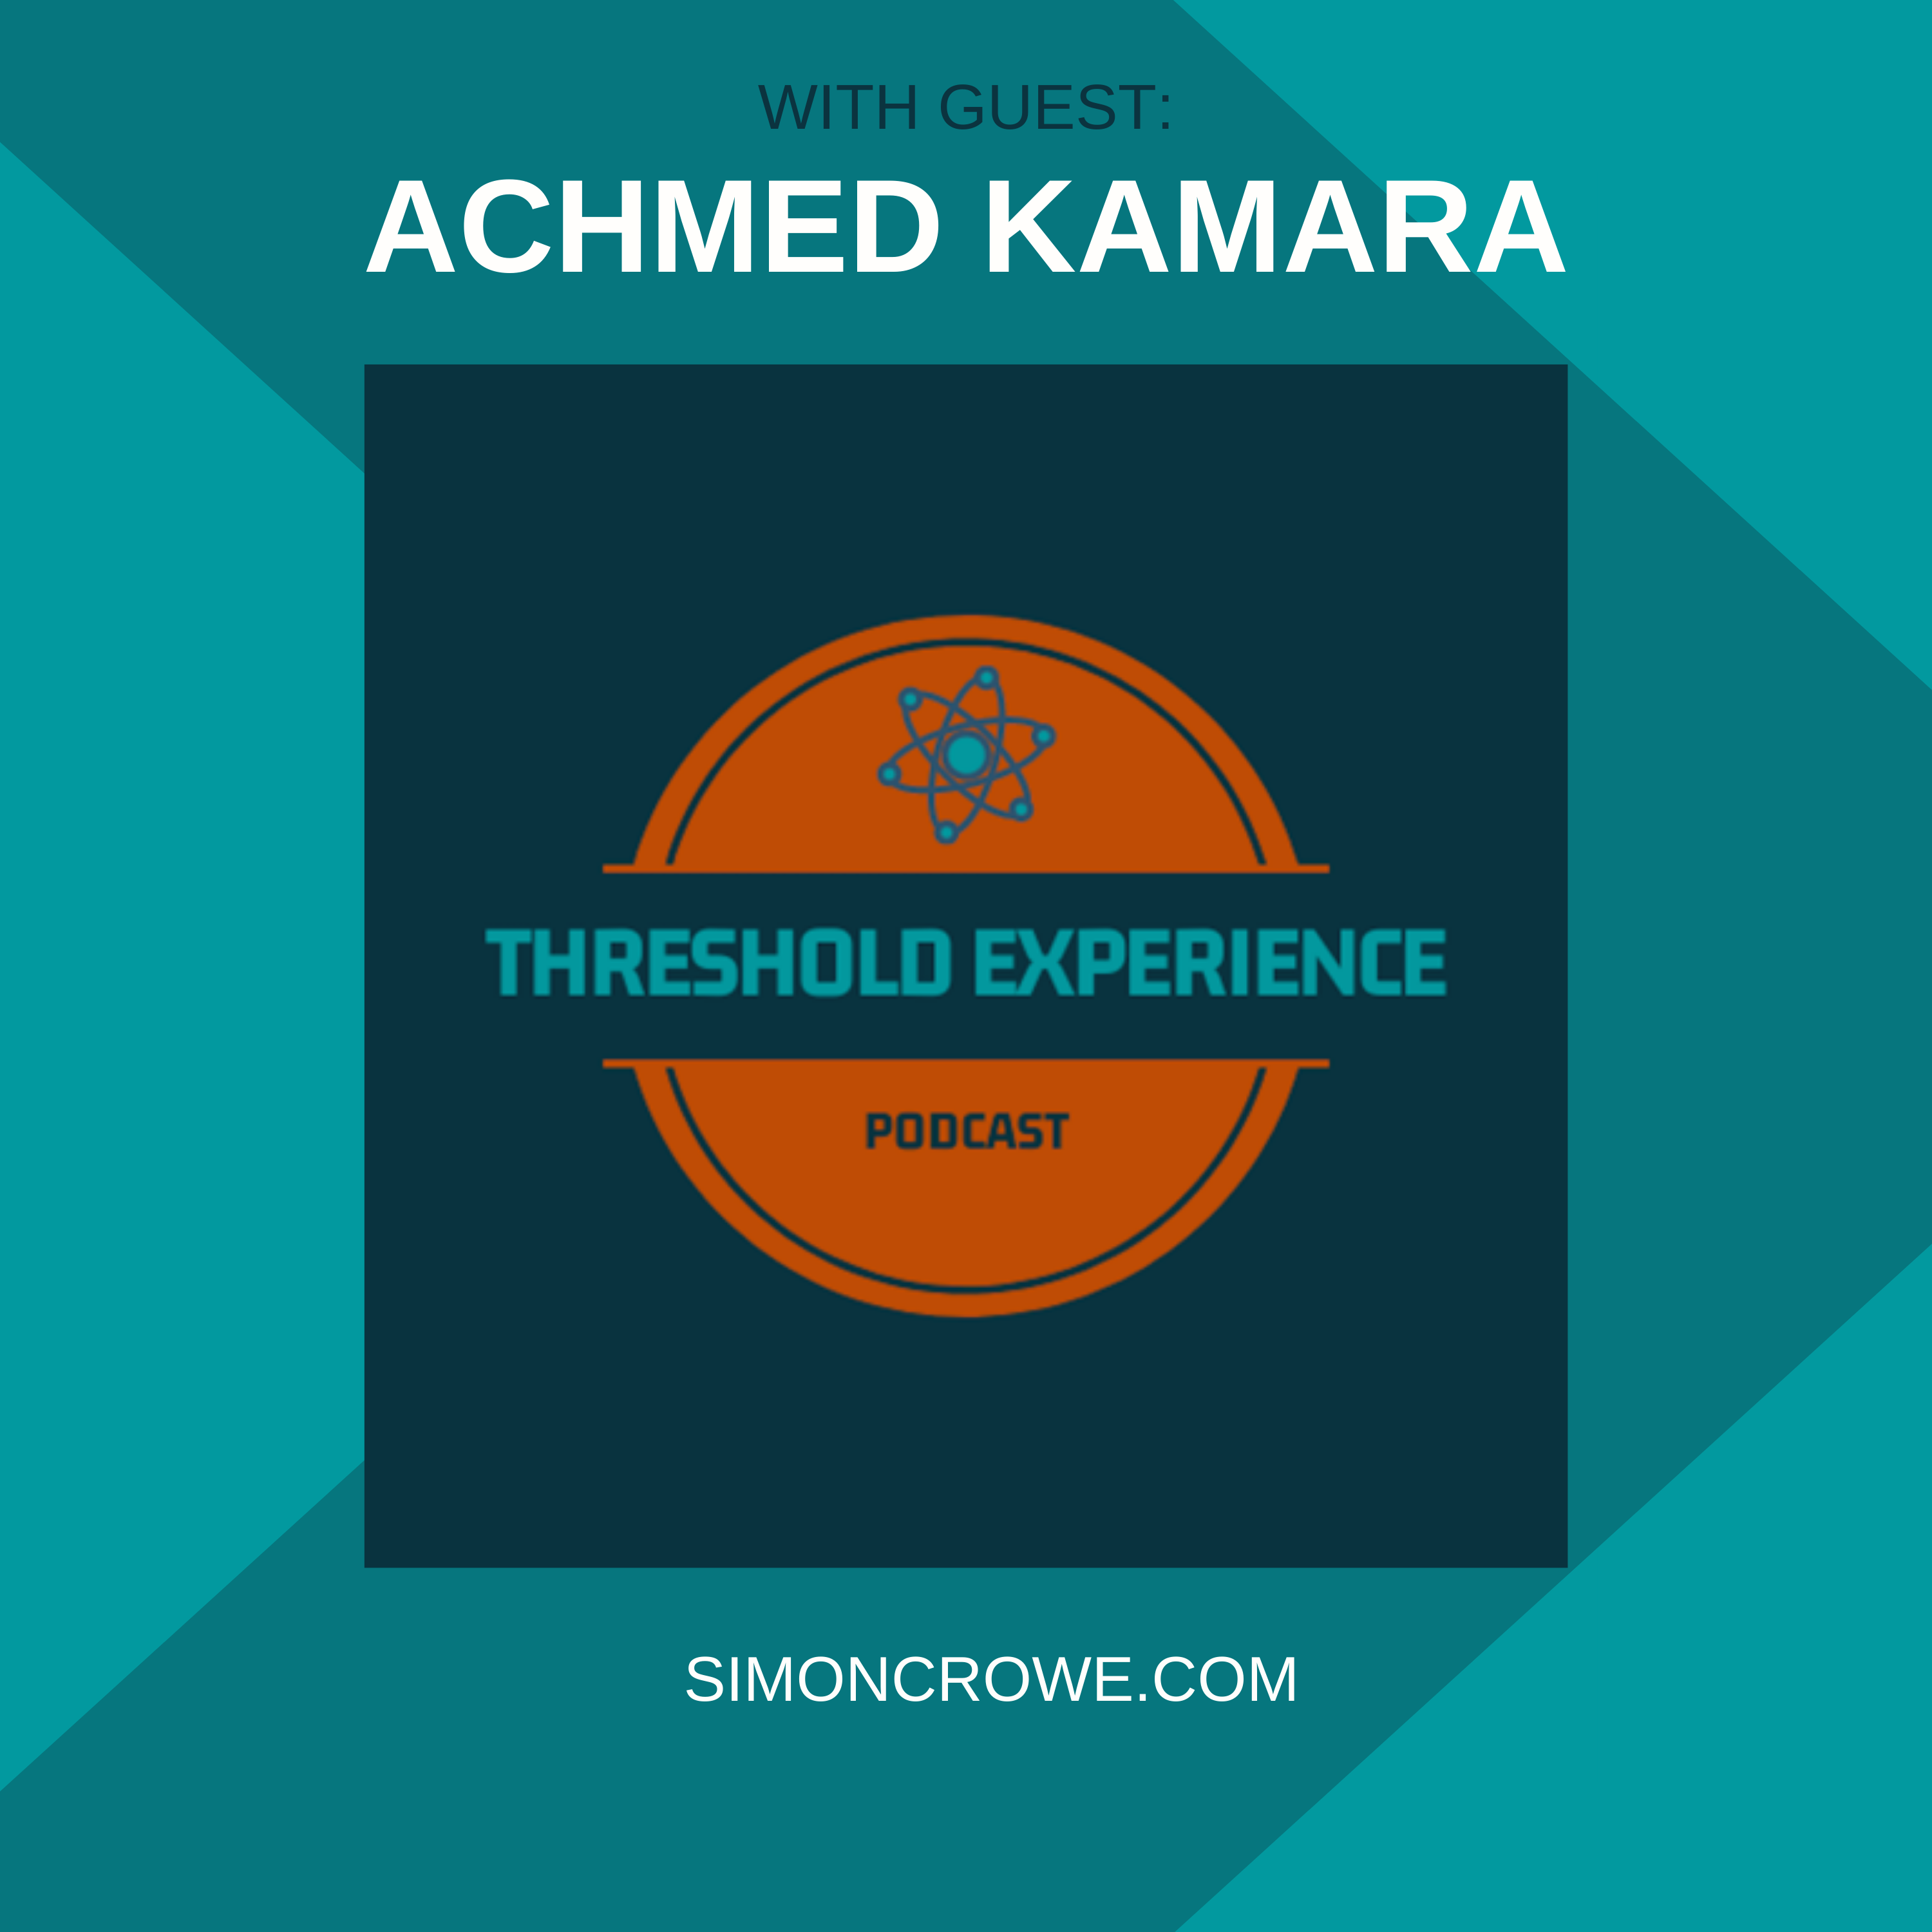 Podcast cover image showing the names of the people in discussion about threshold experiences, Simon Crowe & Achmed Kamara